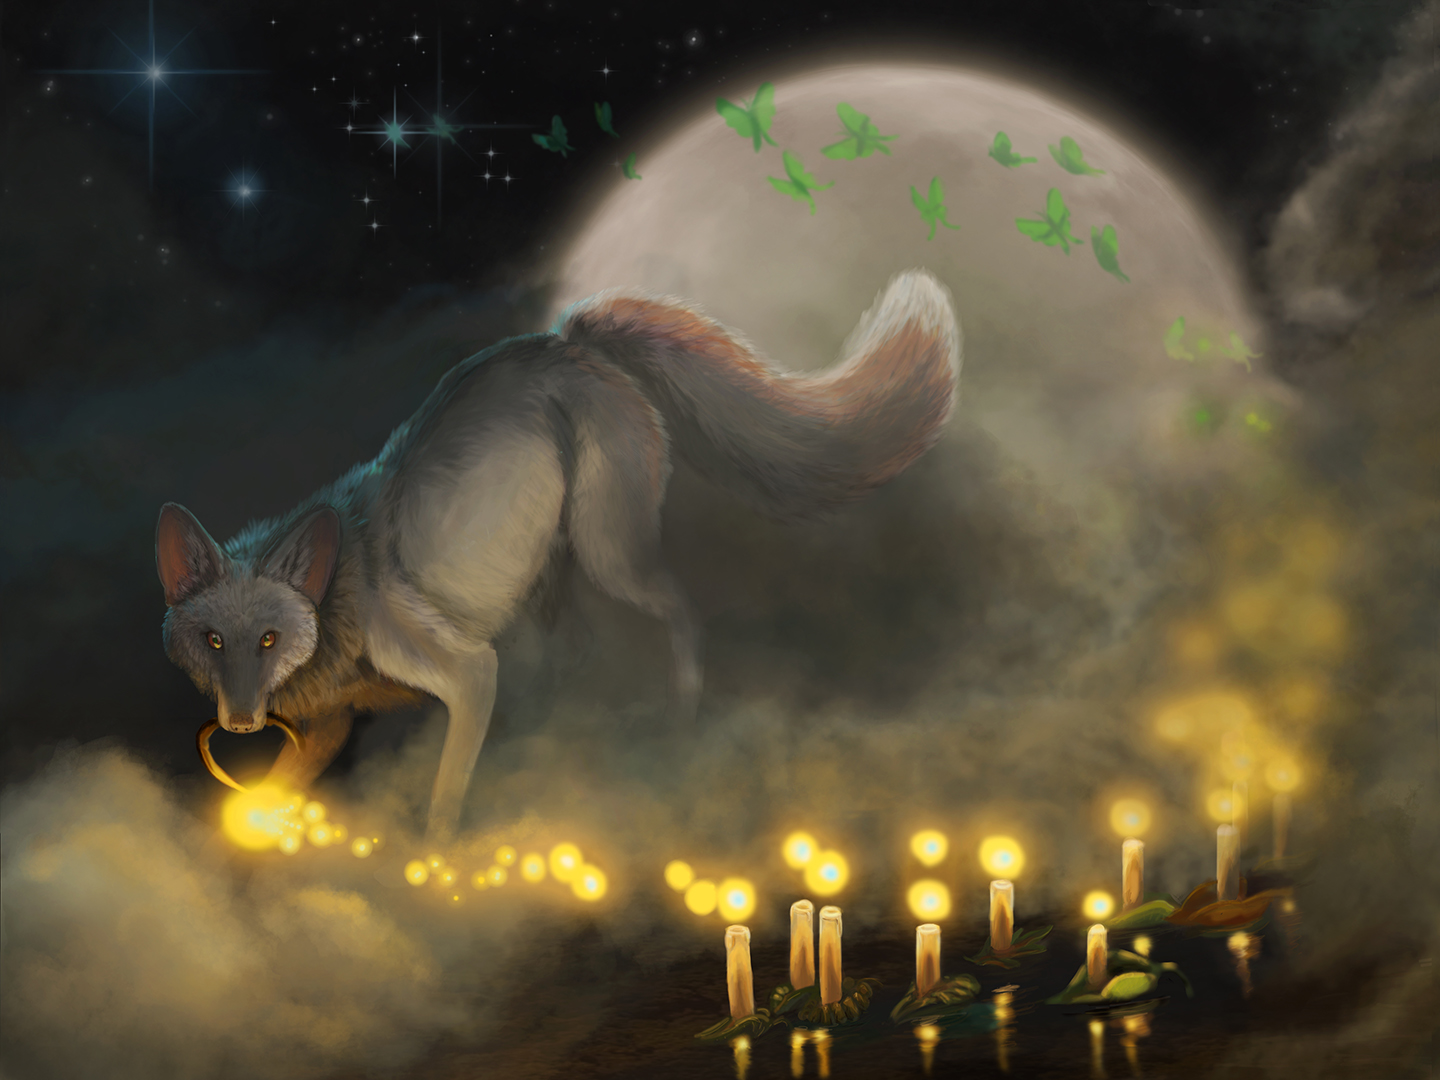 a dark illustration of a fox carries a lantern that spills glowing souls into a river of candles with lunamoths and the moon